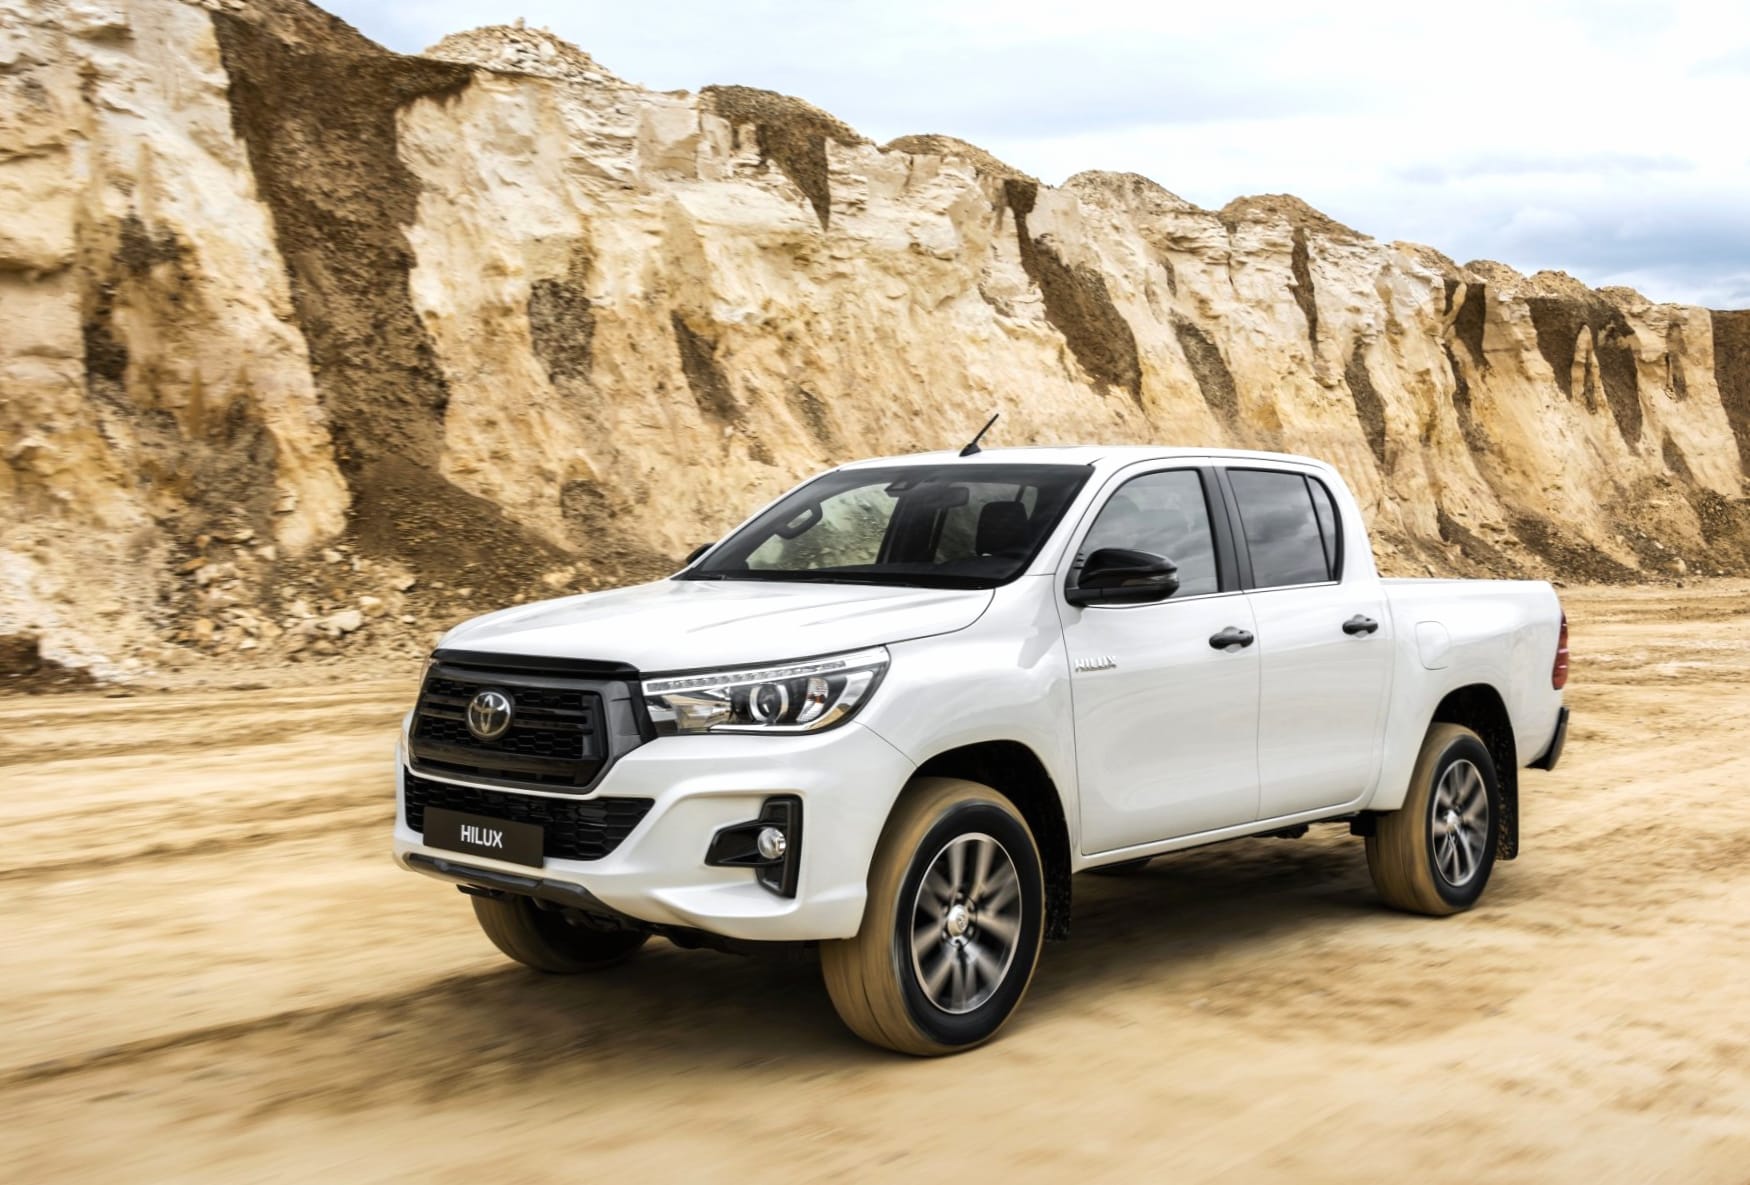 Toyota Hilux wallpapers HD quality